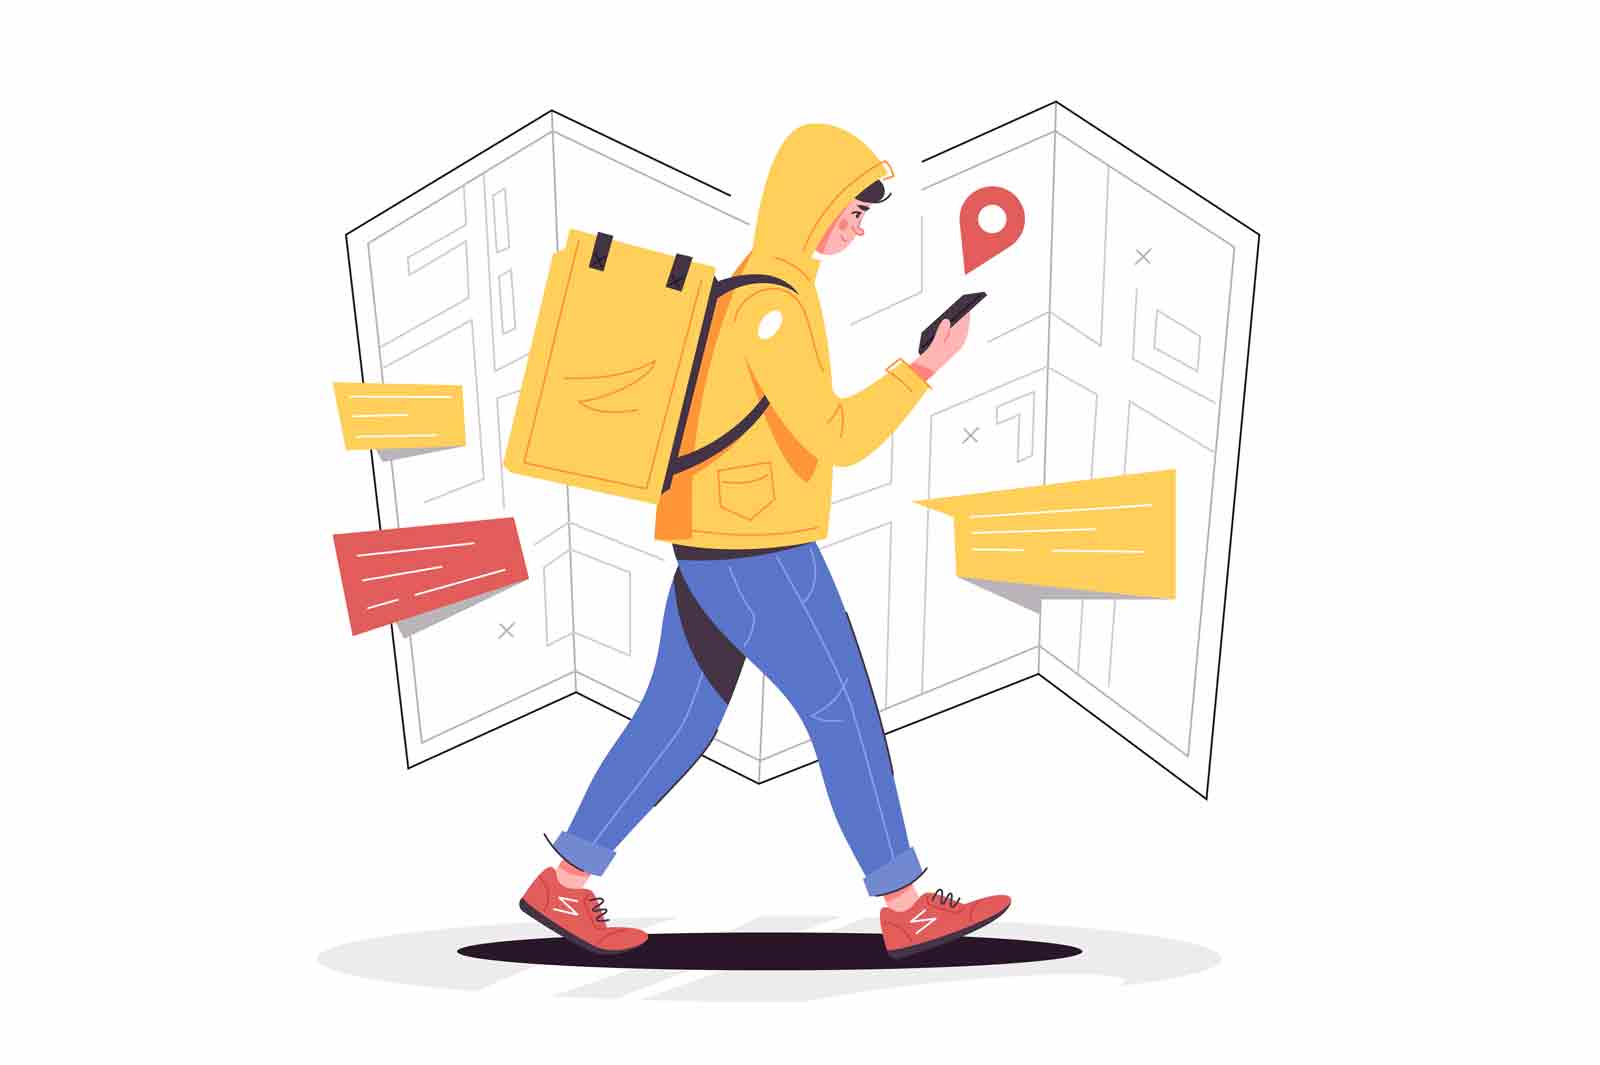 Man work as food courier on foot vector illustration. Follow path by app navigation flat style. Shipping, transfer, delivery service concept